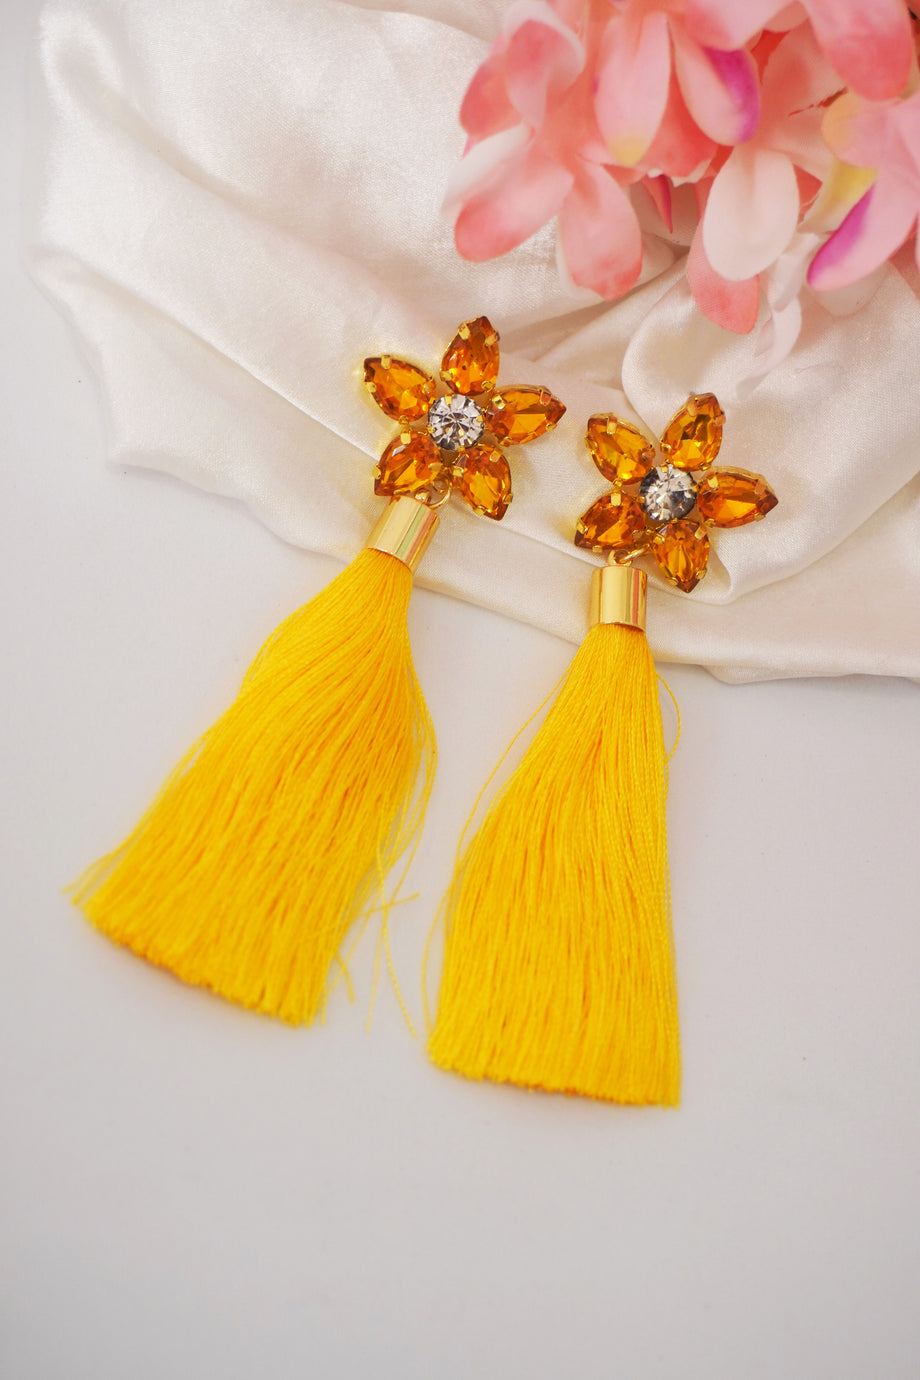 Buy quality 22kt gold cz casting fancy earrings with chain tassels in  Chennai